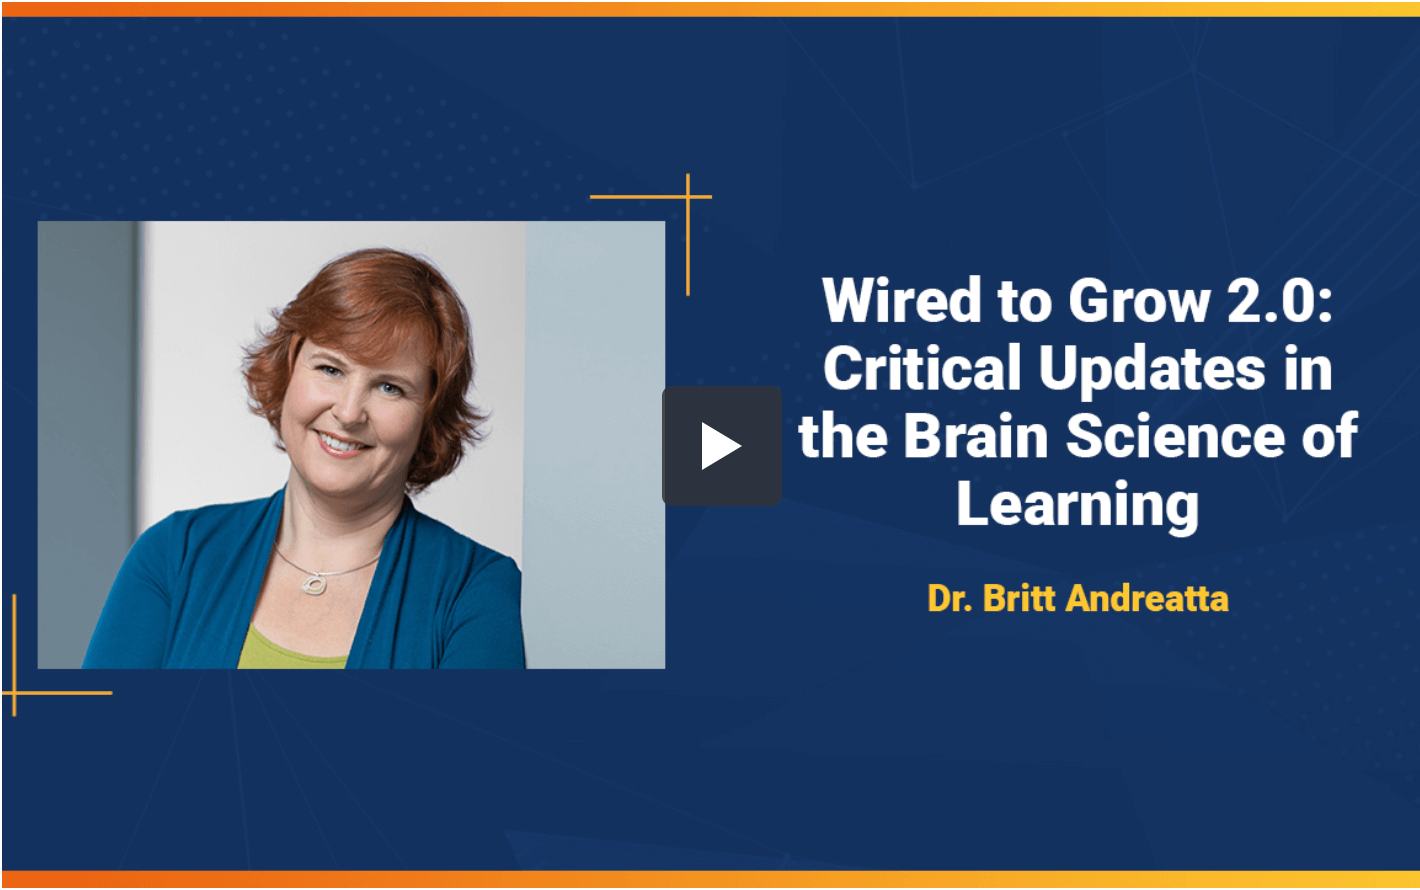 Image of Britt Andreatta with the words Wired to Grow 2.0: Critical Updates in the Brain Science of Learning​